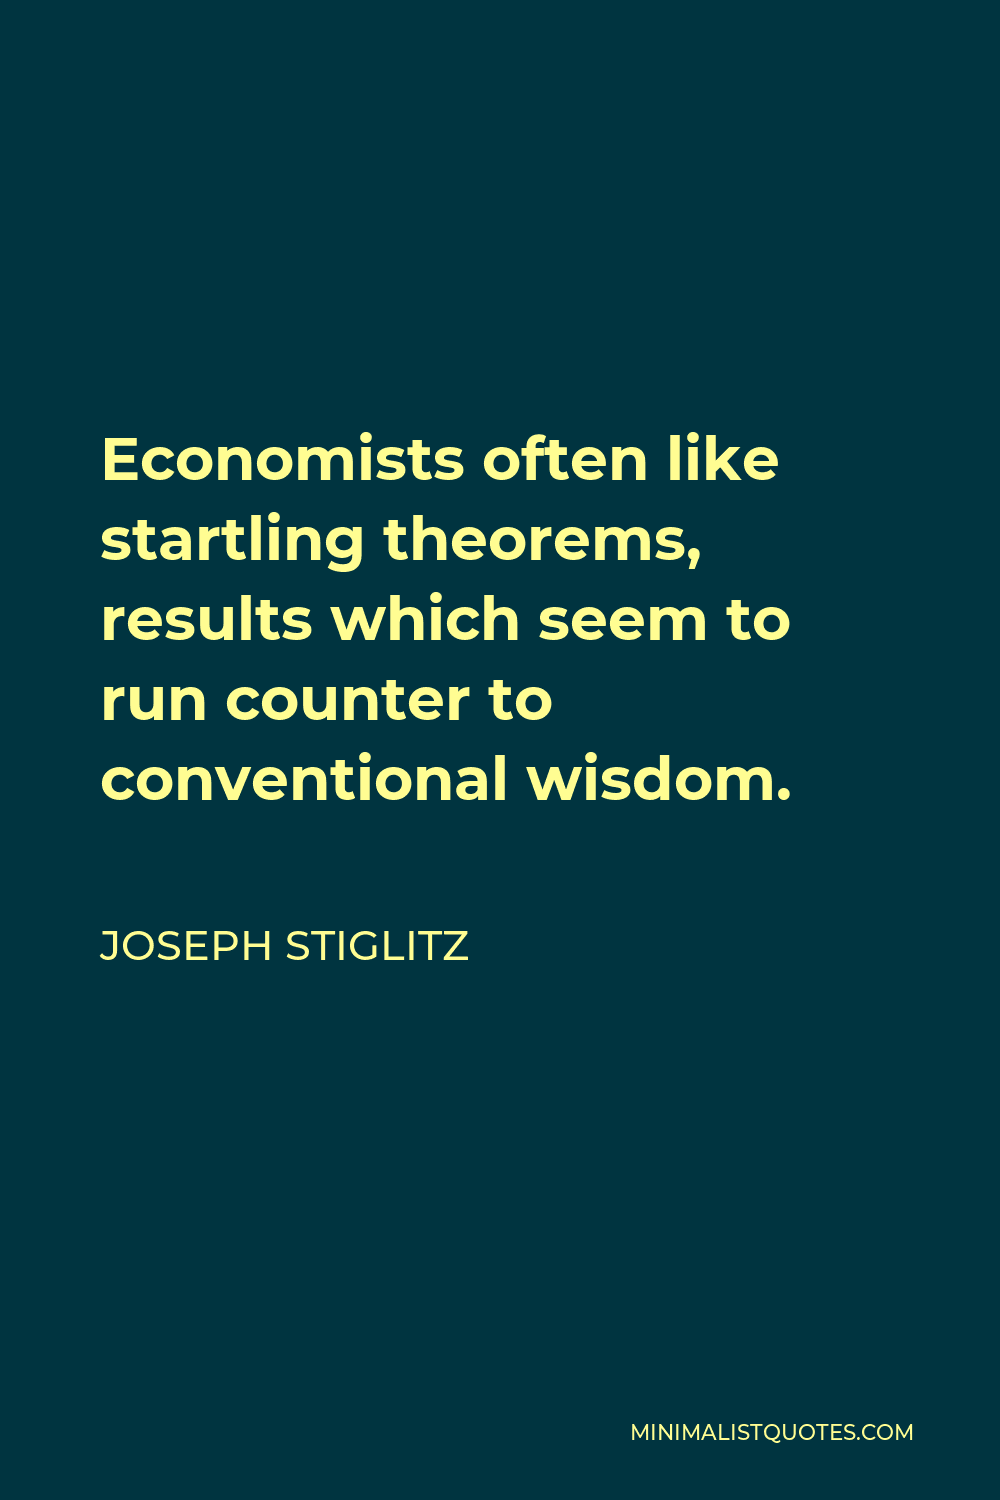 Joseph Stiglitz Quote - Economists often like startling theorems, results which seem to run counter to conventional wisdom.